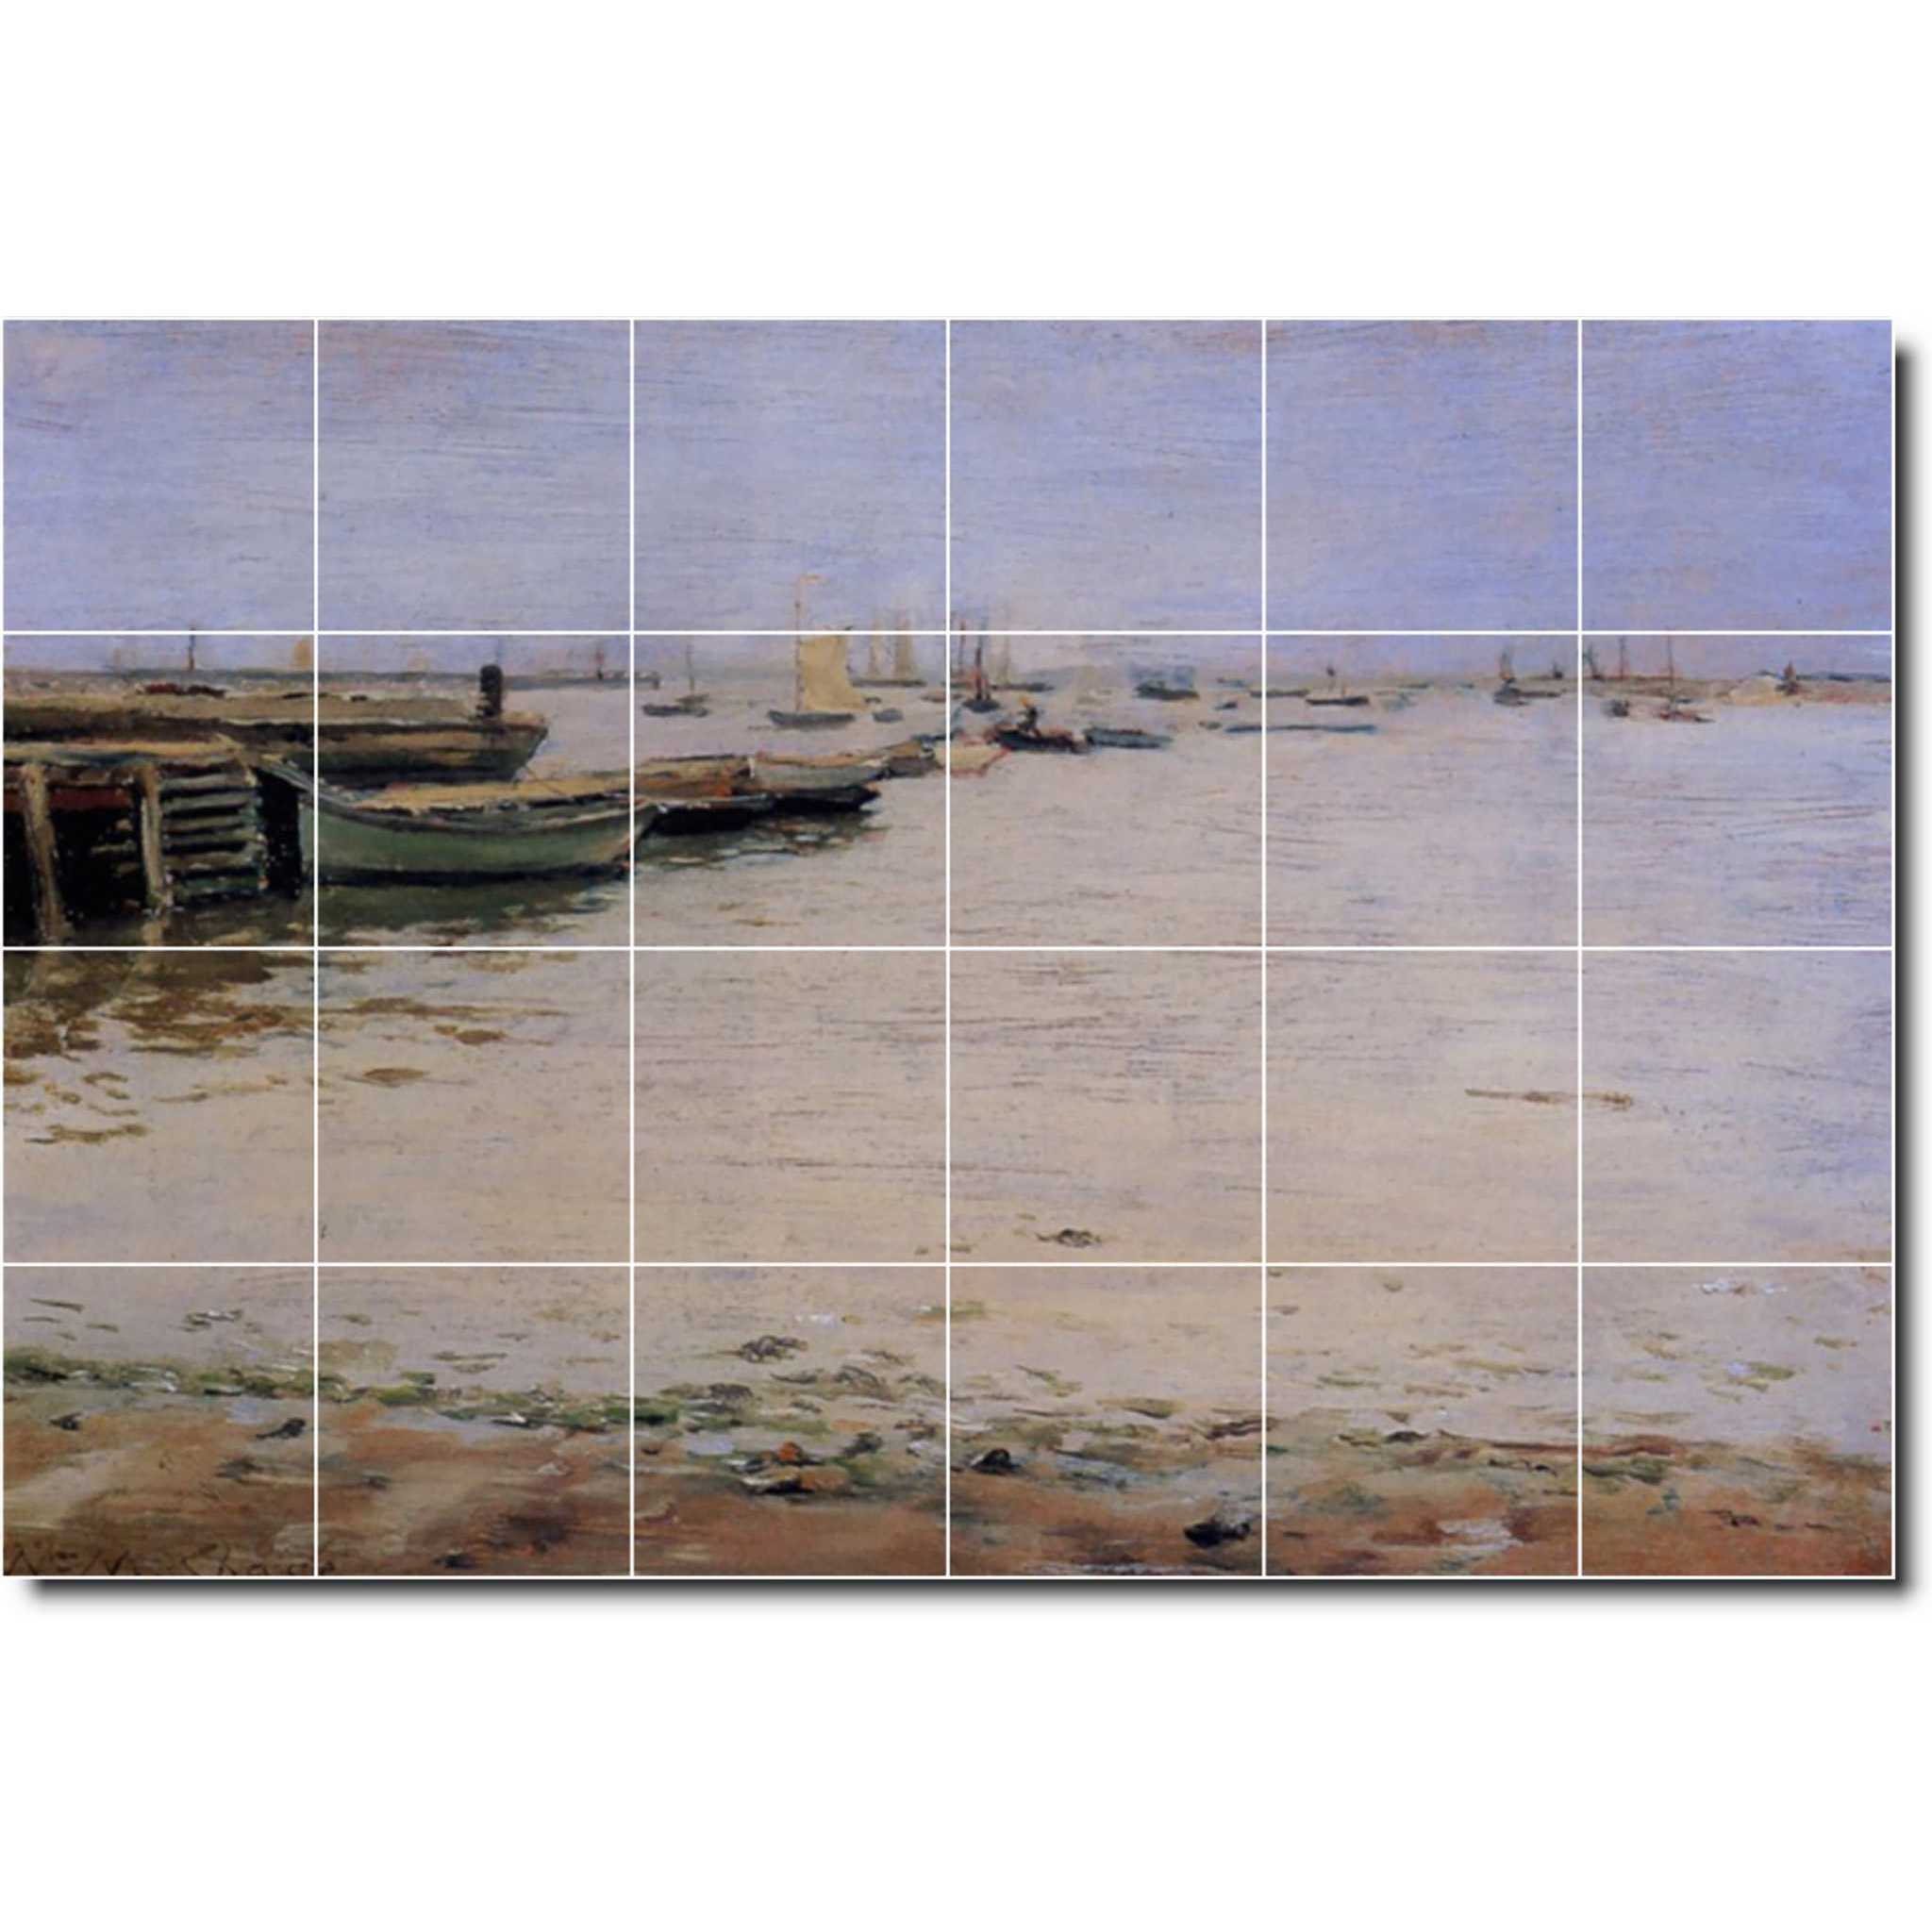 william chase waterfront painting ceramic tile mural p01528